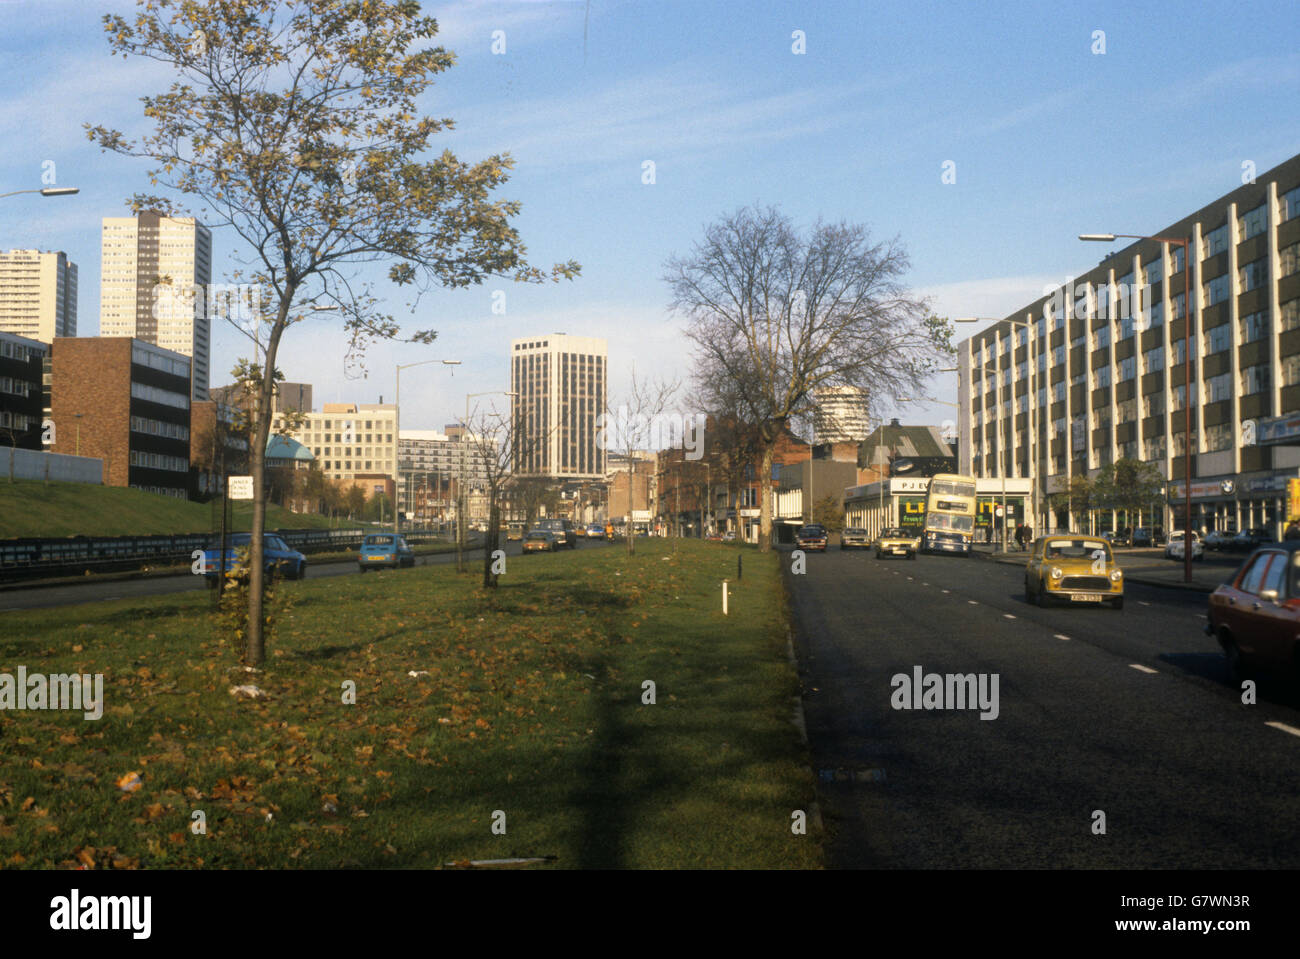 Bristol Street looking towards Birmingham from the south. On right (in background) is the 20-storey circular building, the Rotunda, located in the Bull Ring. Stock Photo